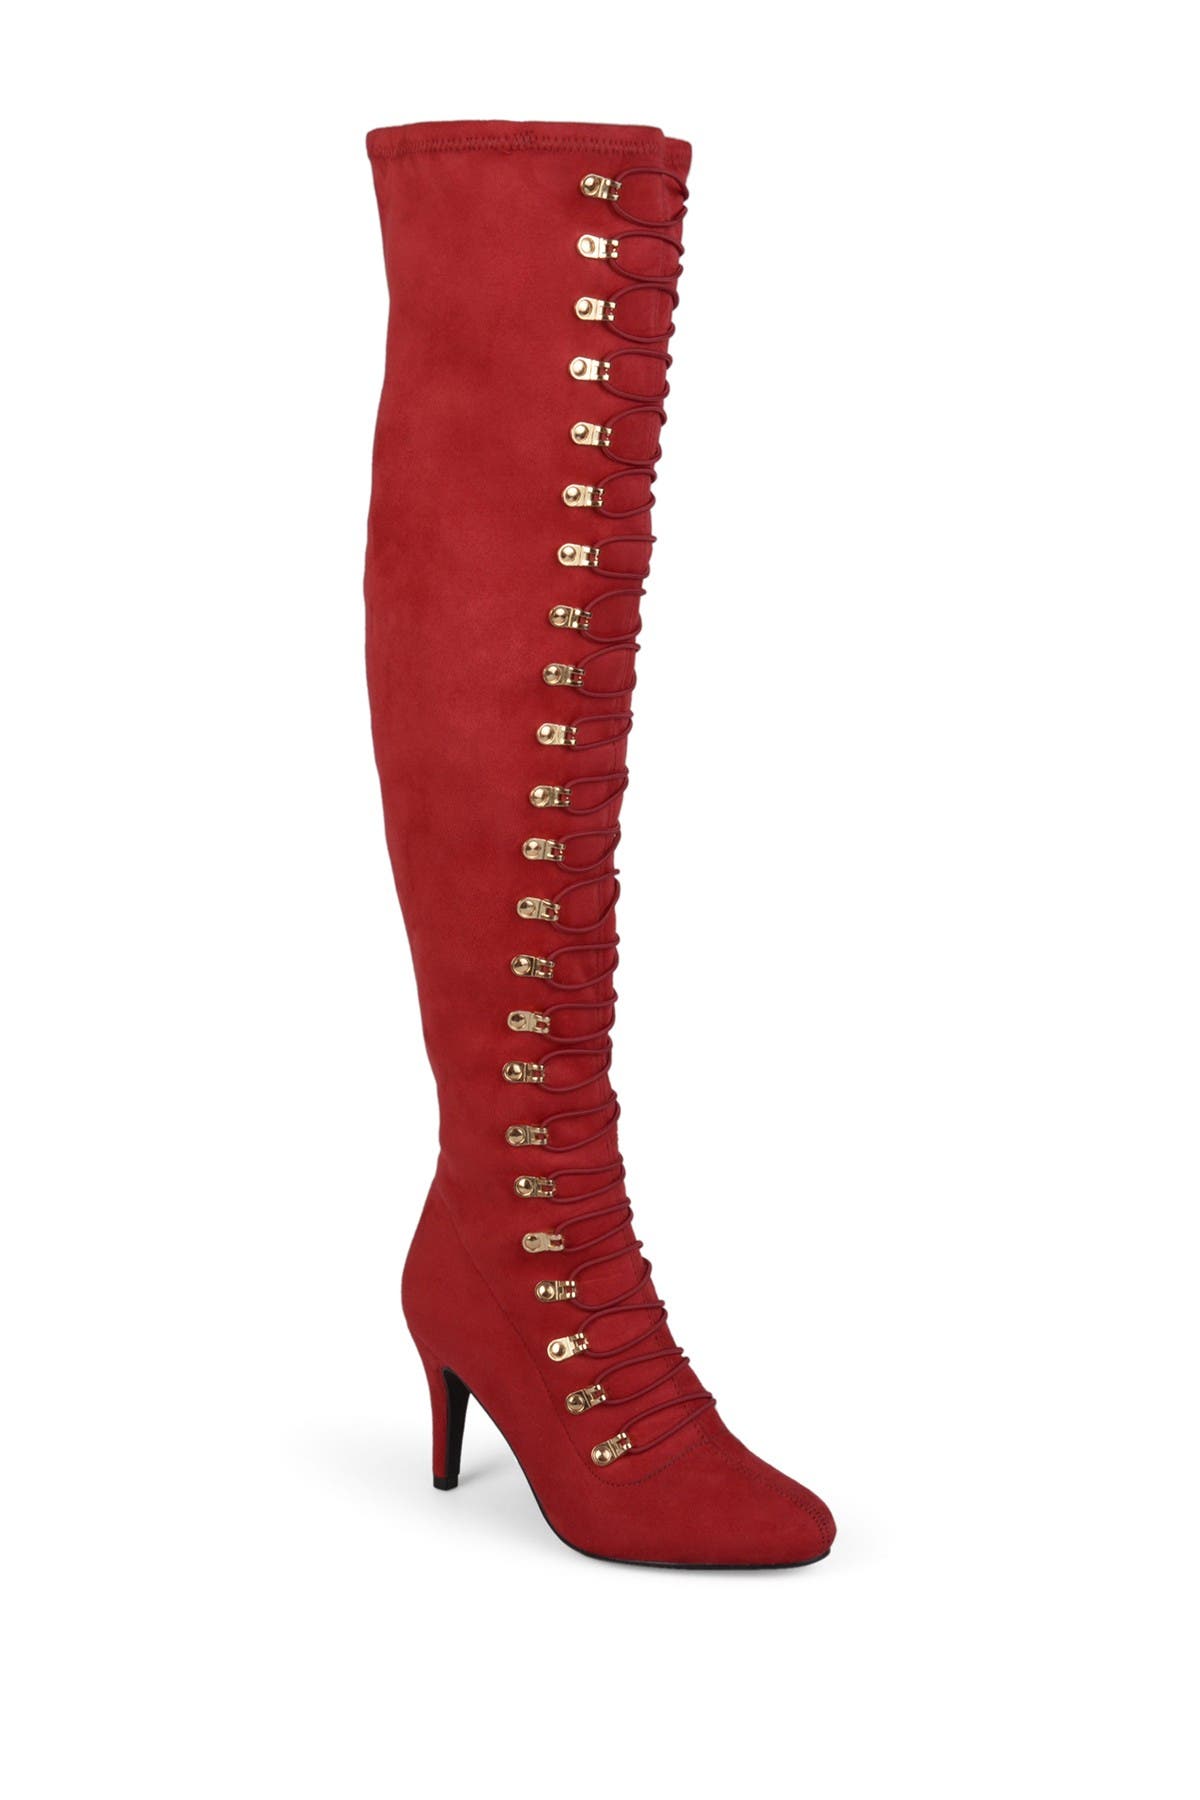 journee collection over the knee boots